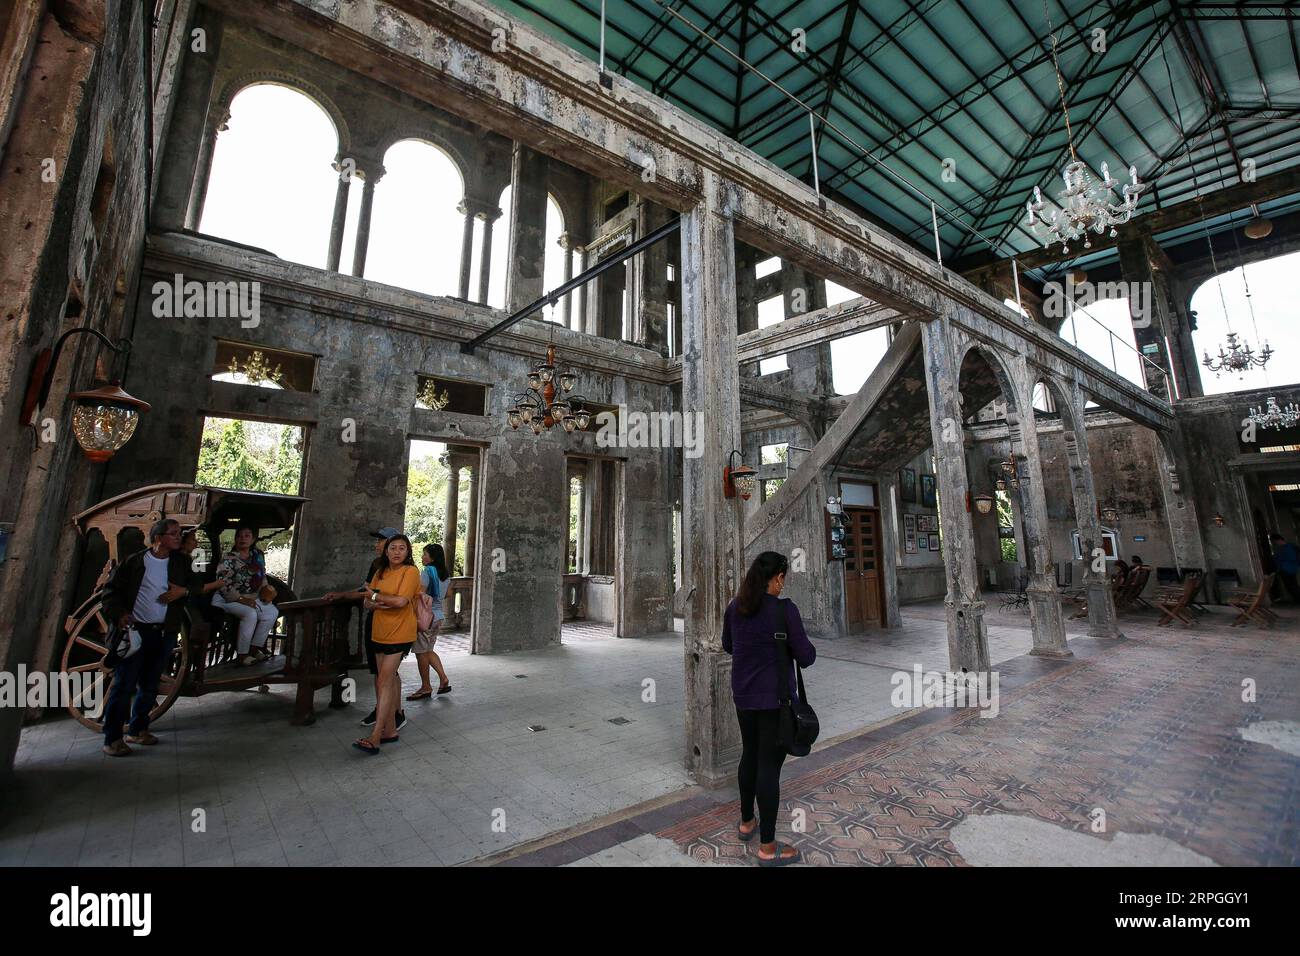 191016 -- TALISAY CITY, Oct. 16, 2019 -- People visit a tourist spot called The Ruins in Talisay City, the Philippines, Oct. 16, 2019.  PHILIPPINES-TALISAY CITY-TOURIST SPOT-THE RUINS ROUELLExUMALI PUBLICATIONxNOTxINxCHN Stock Photo